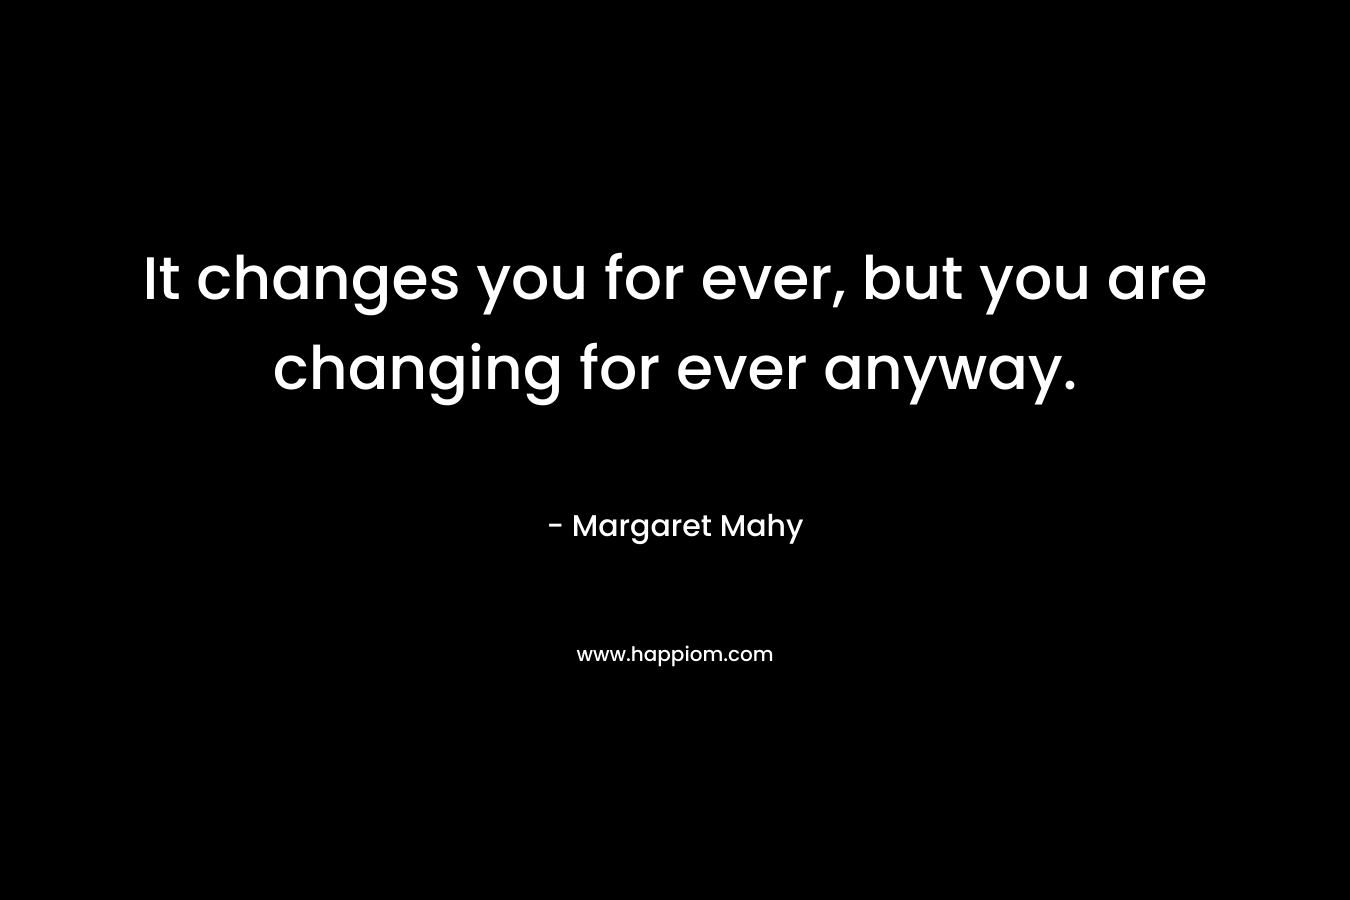 It changes you for ever, but you are changing for ever anyway. – Margaret Mahy